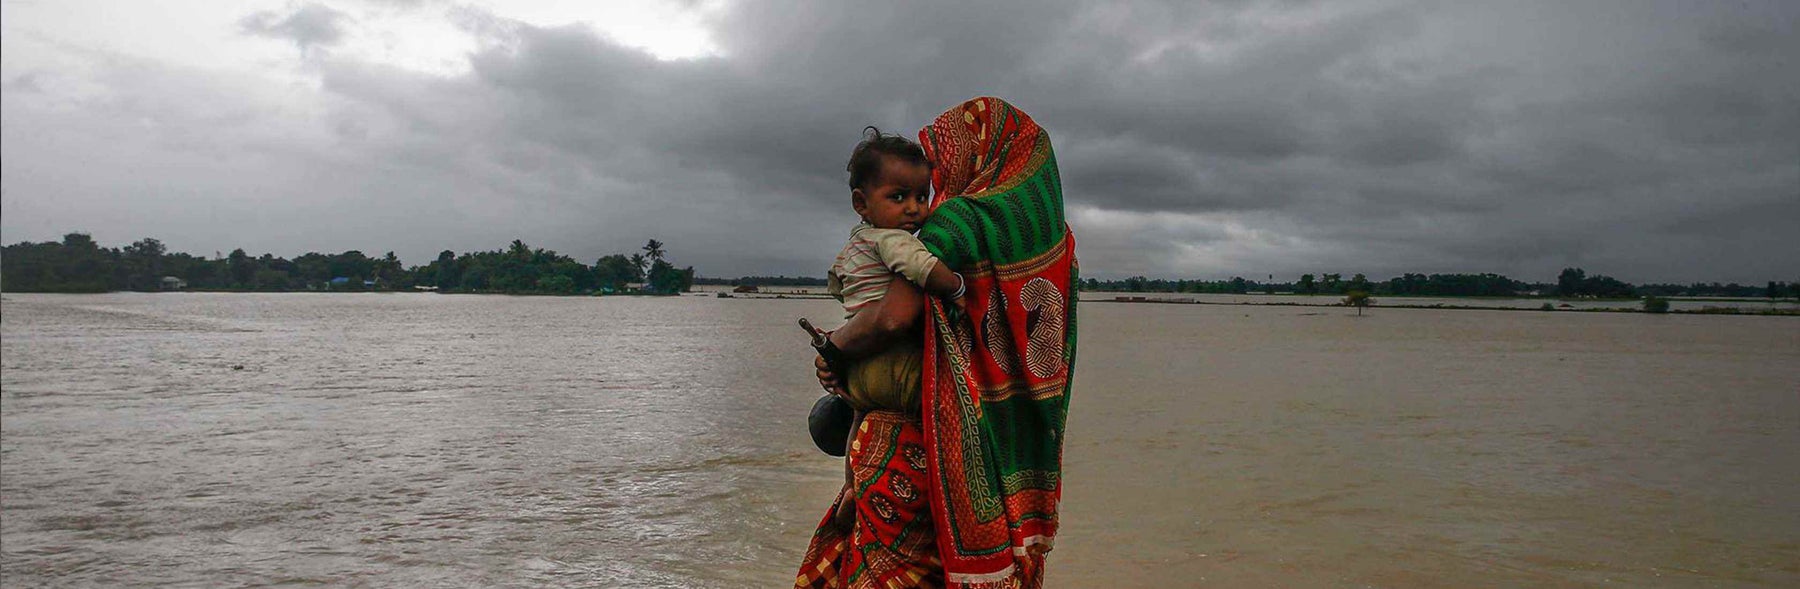 A woman is holding a child in a flooded area